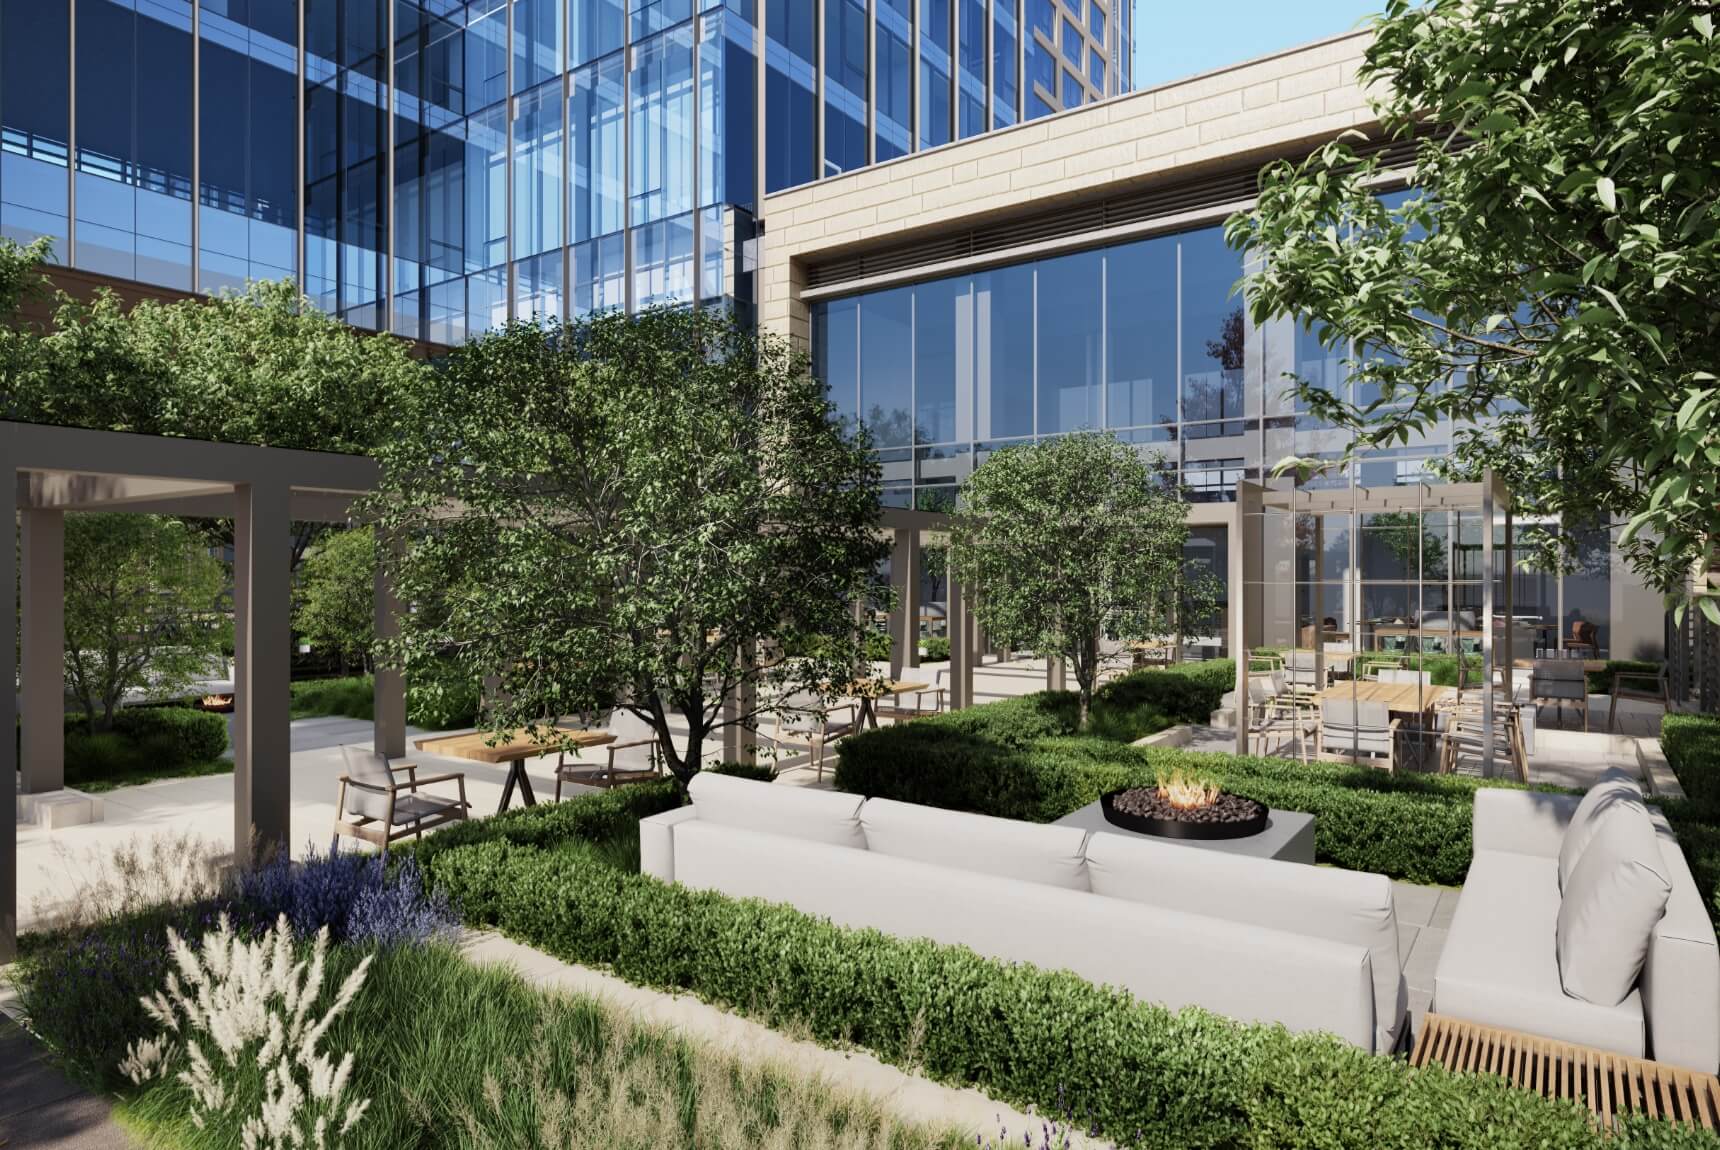 An artist's rendering of a 55+ independent living courtyard within a continuing care building.